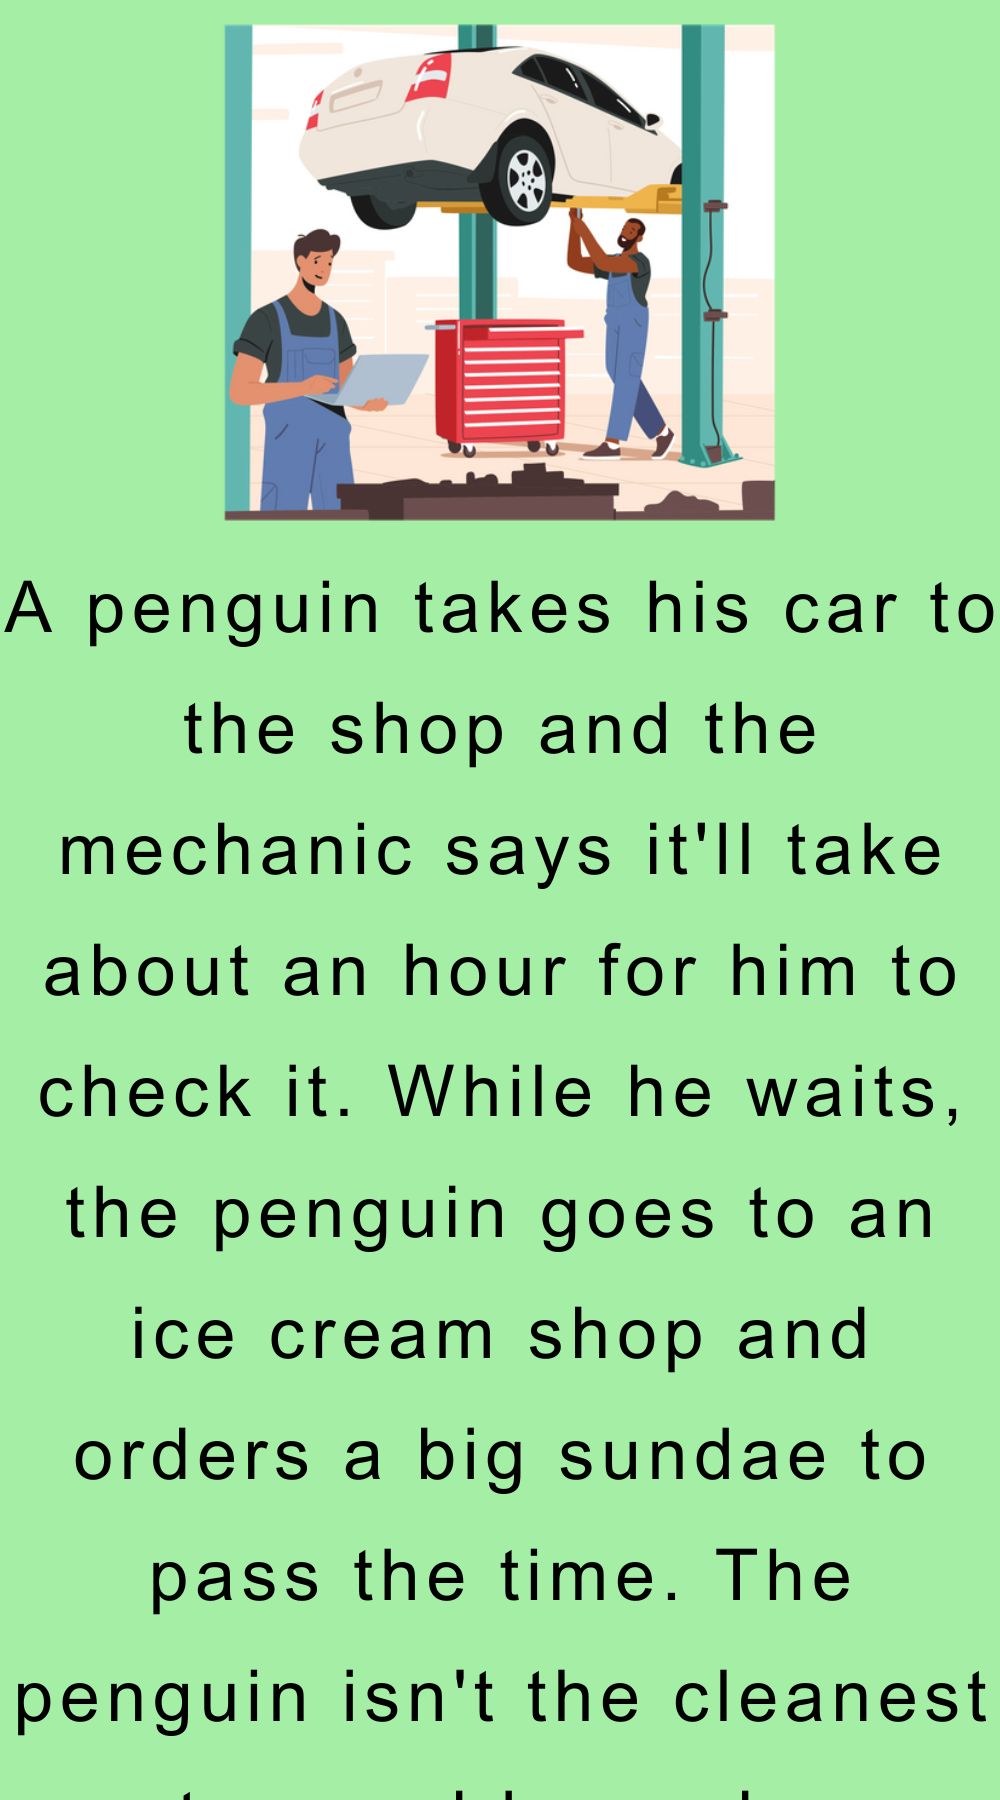 A penguin takes his car to the shop